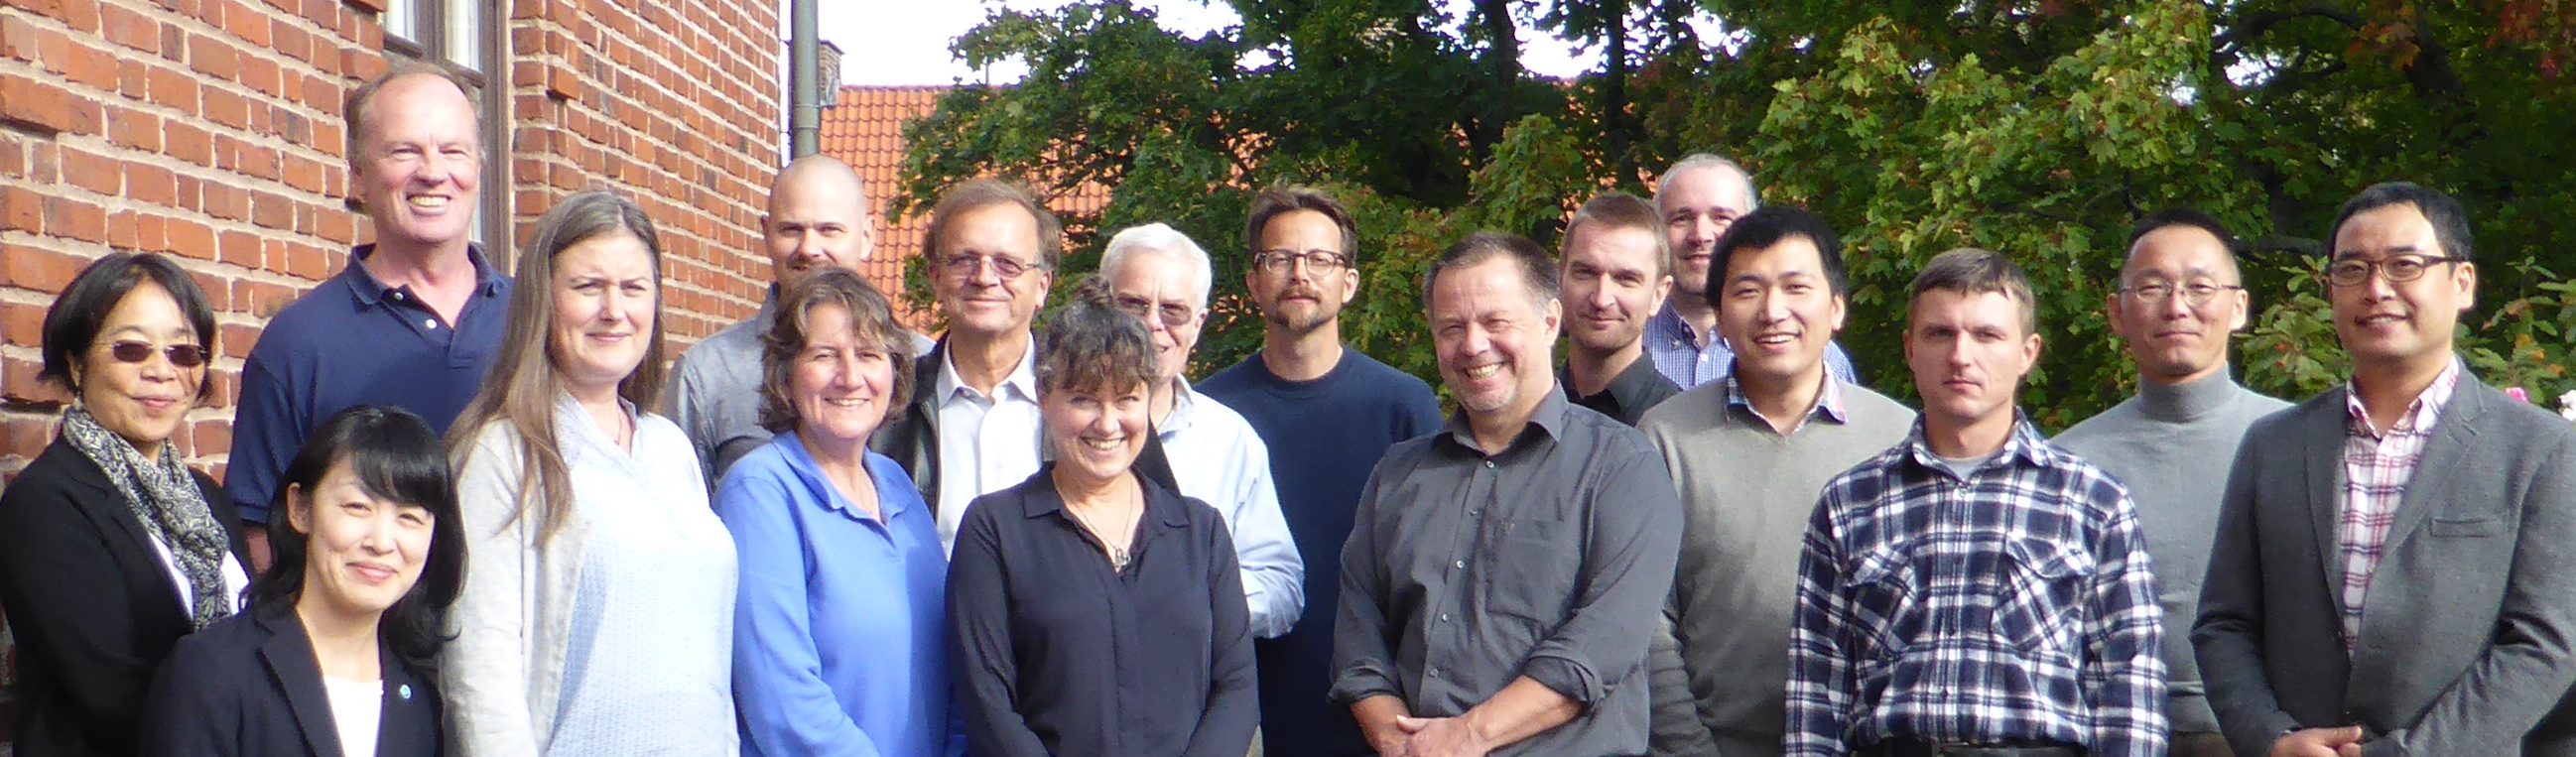 Group photo of participants of the Science Plan workshop